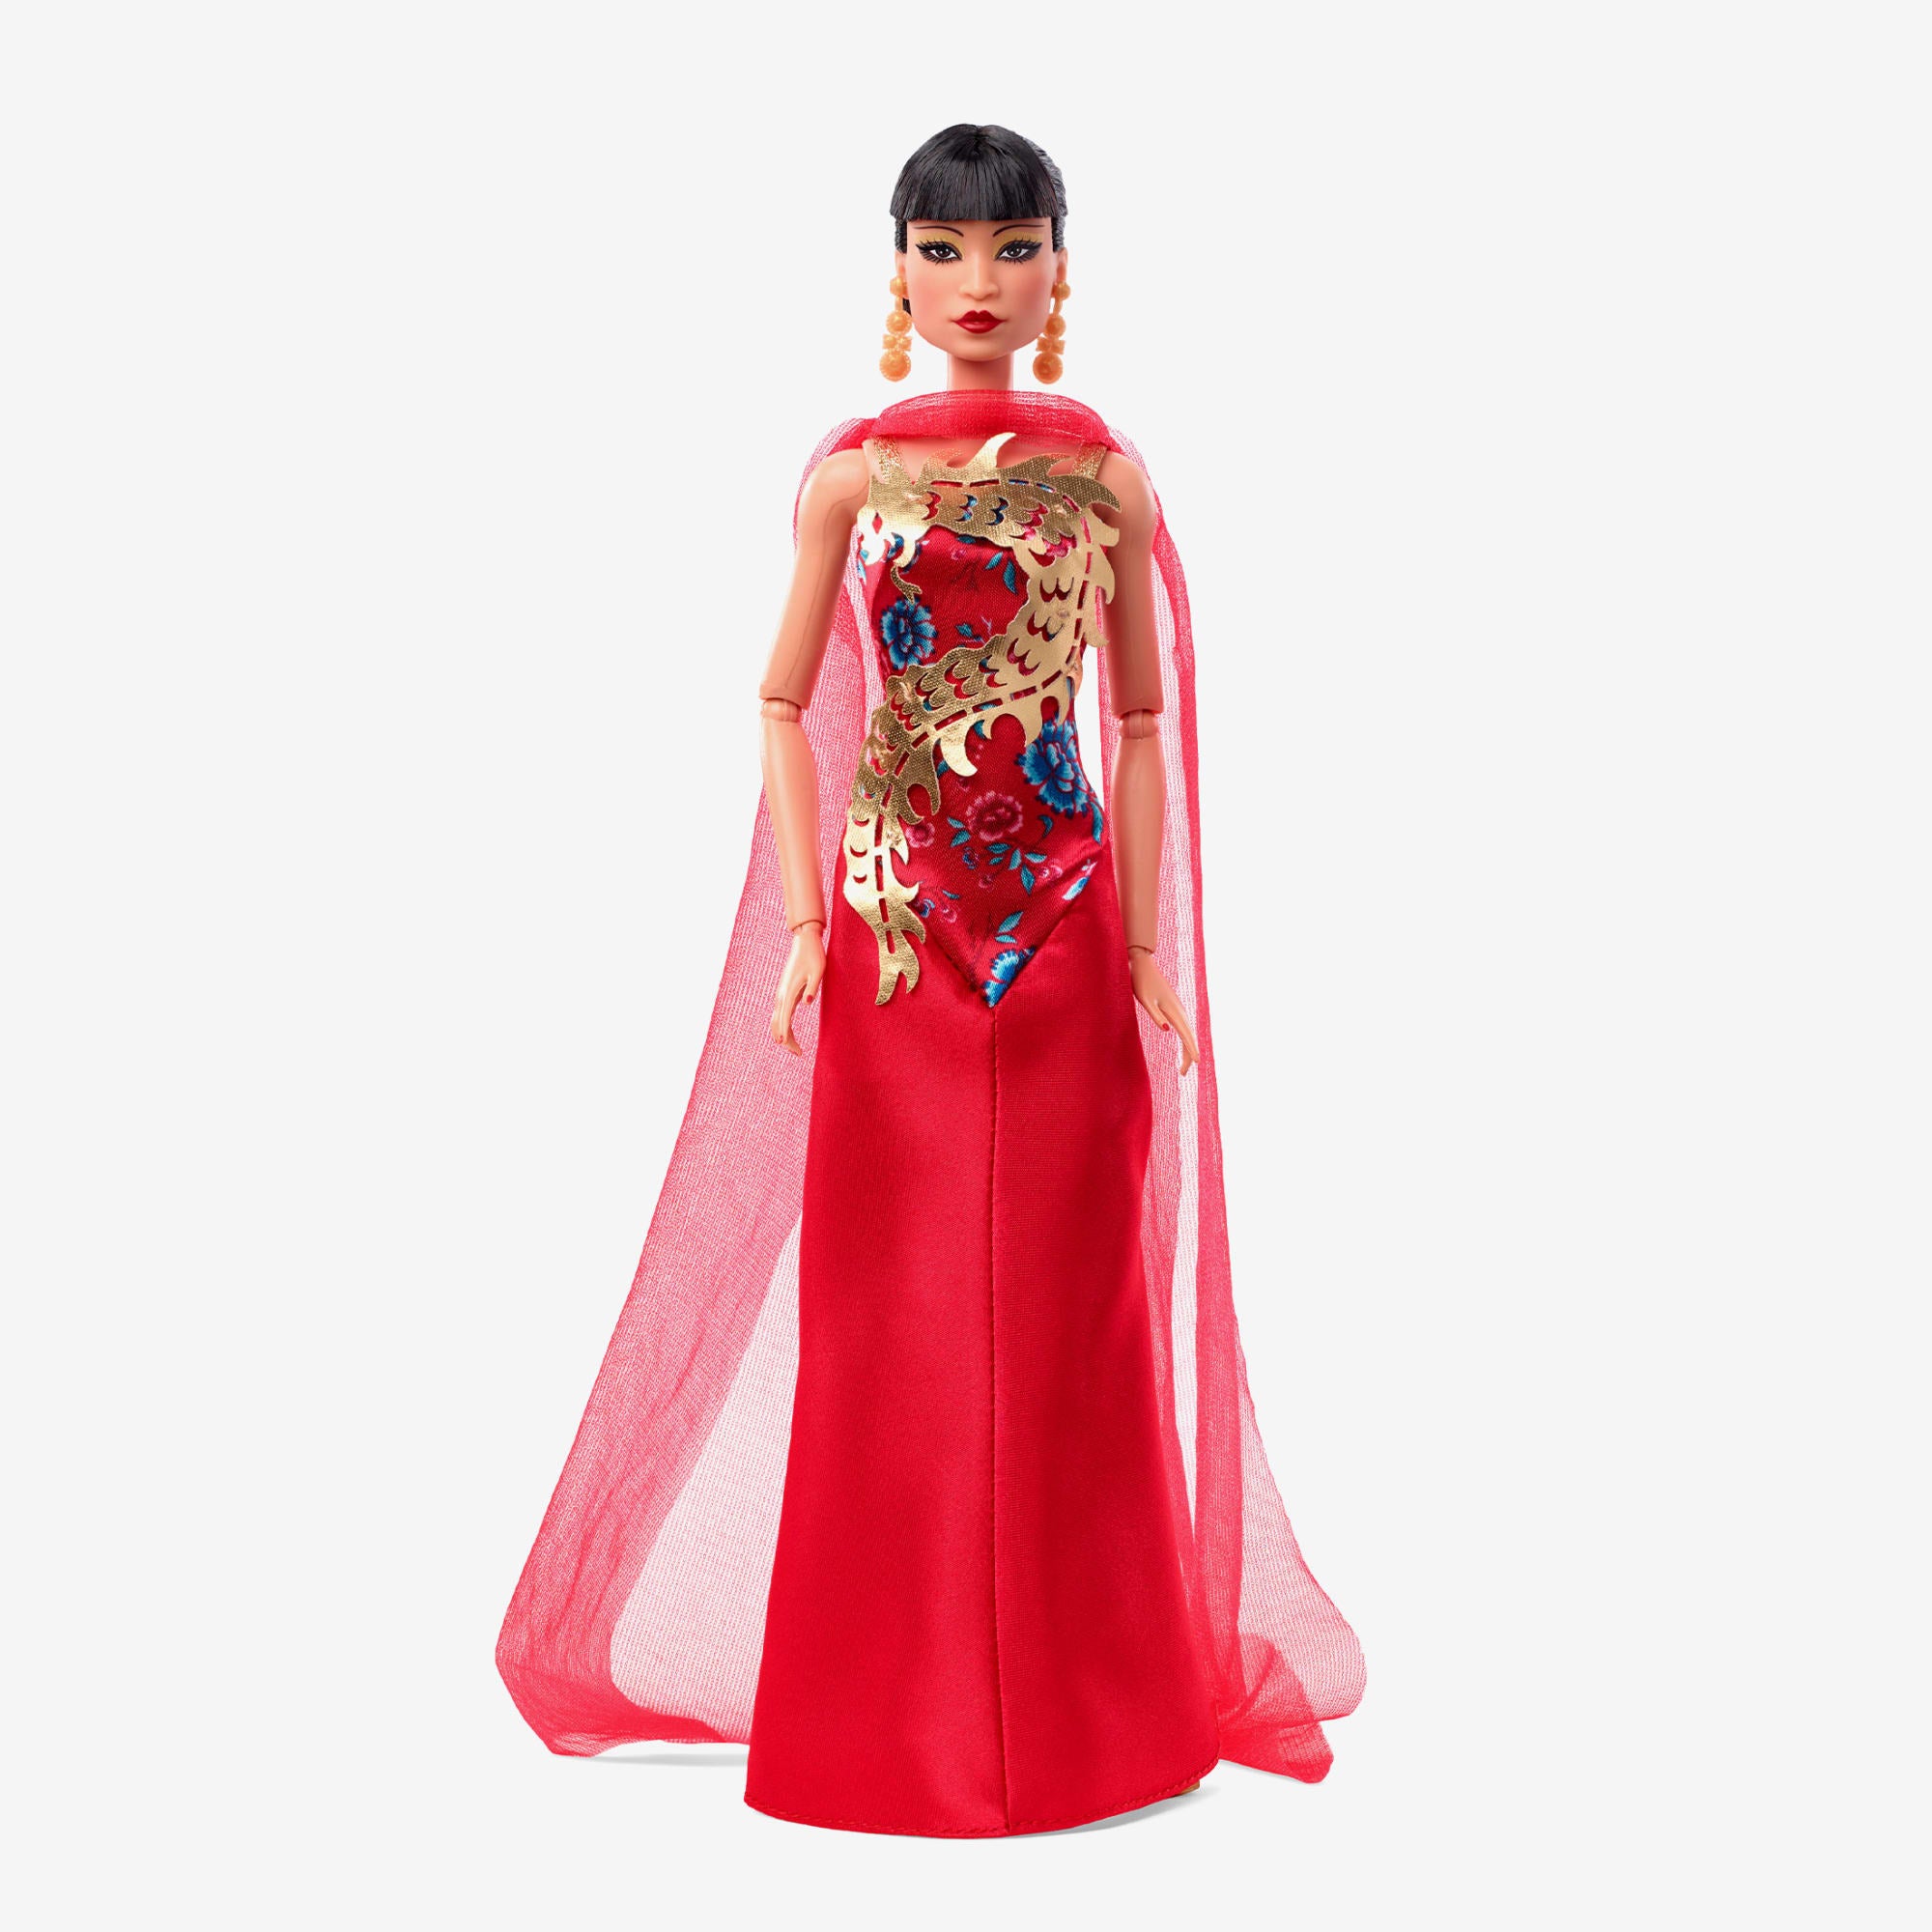 Judge Barbie: Where to Buy Barbie Dolls, Collectibles